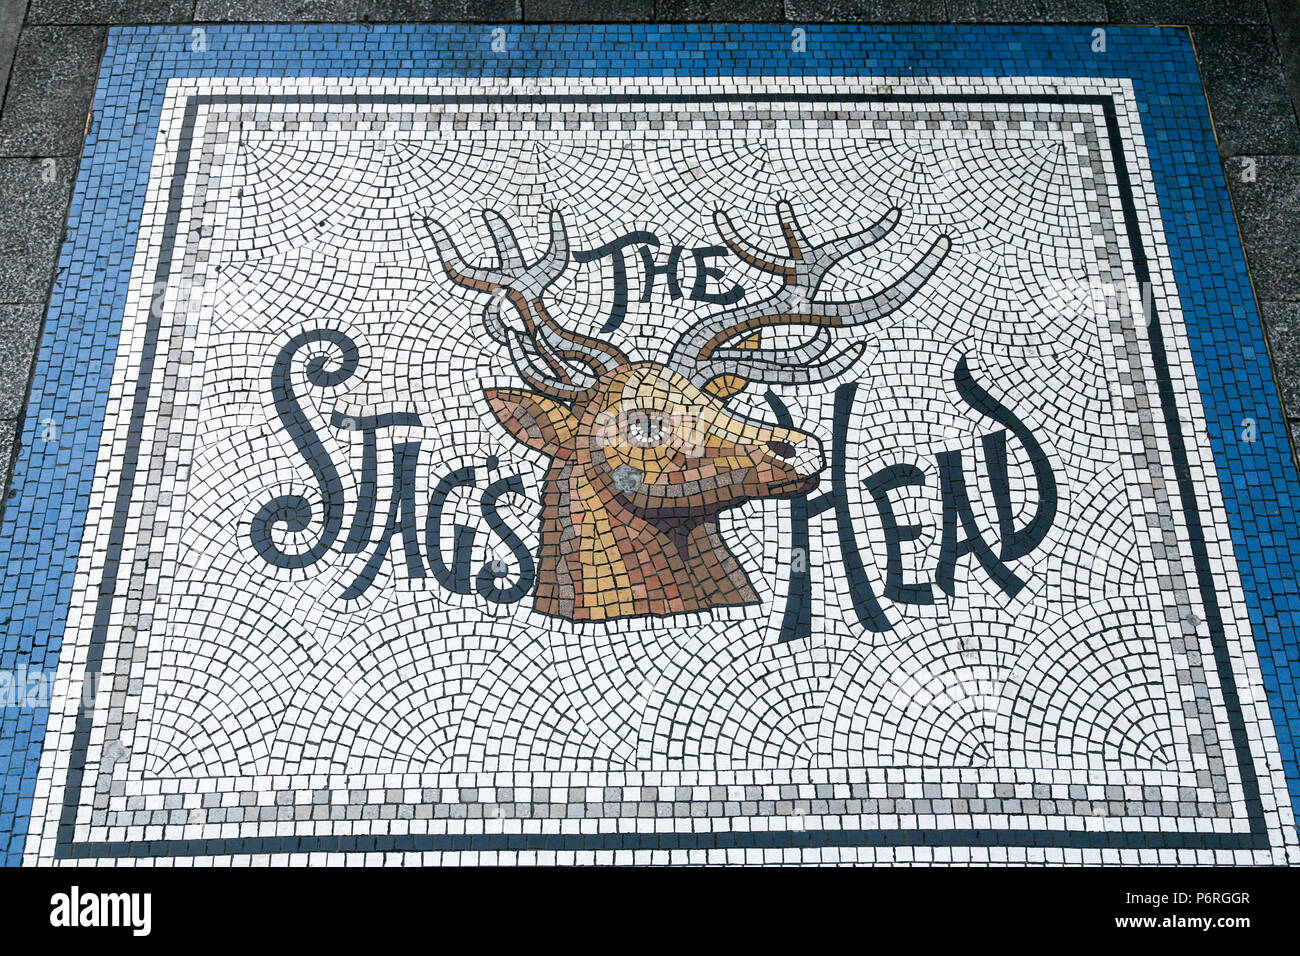 The Stag's Head pub entrance mosaic from the perfectly preserved traditional Victorian Pub of the same name, Dame Street, Dublin, Ireland, Europe. Stock Photo